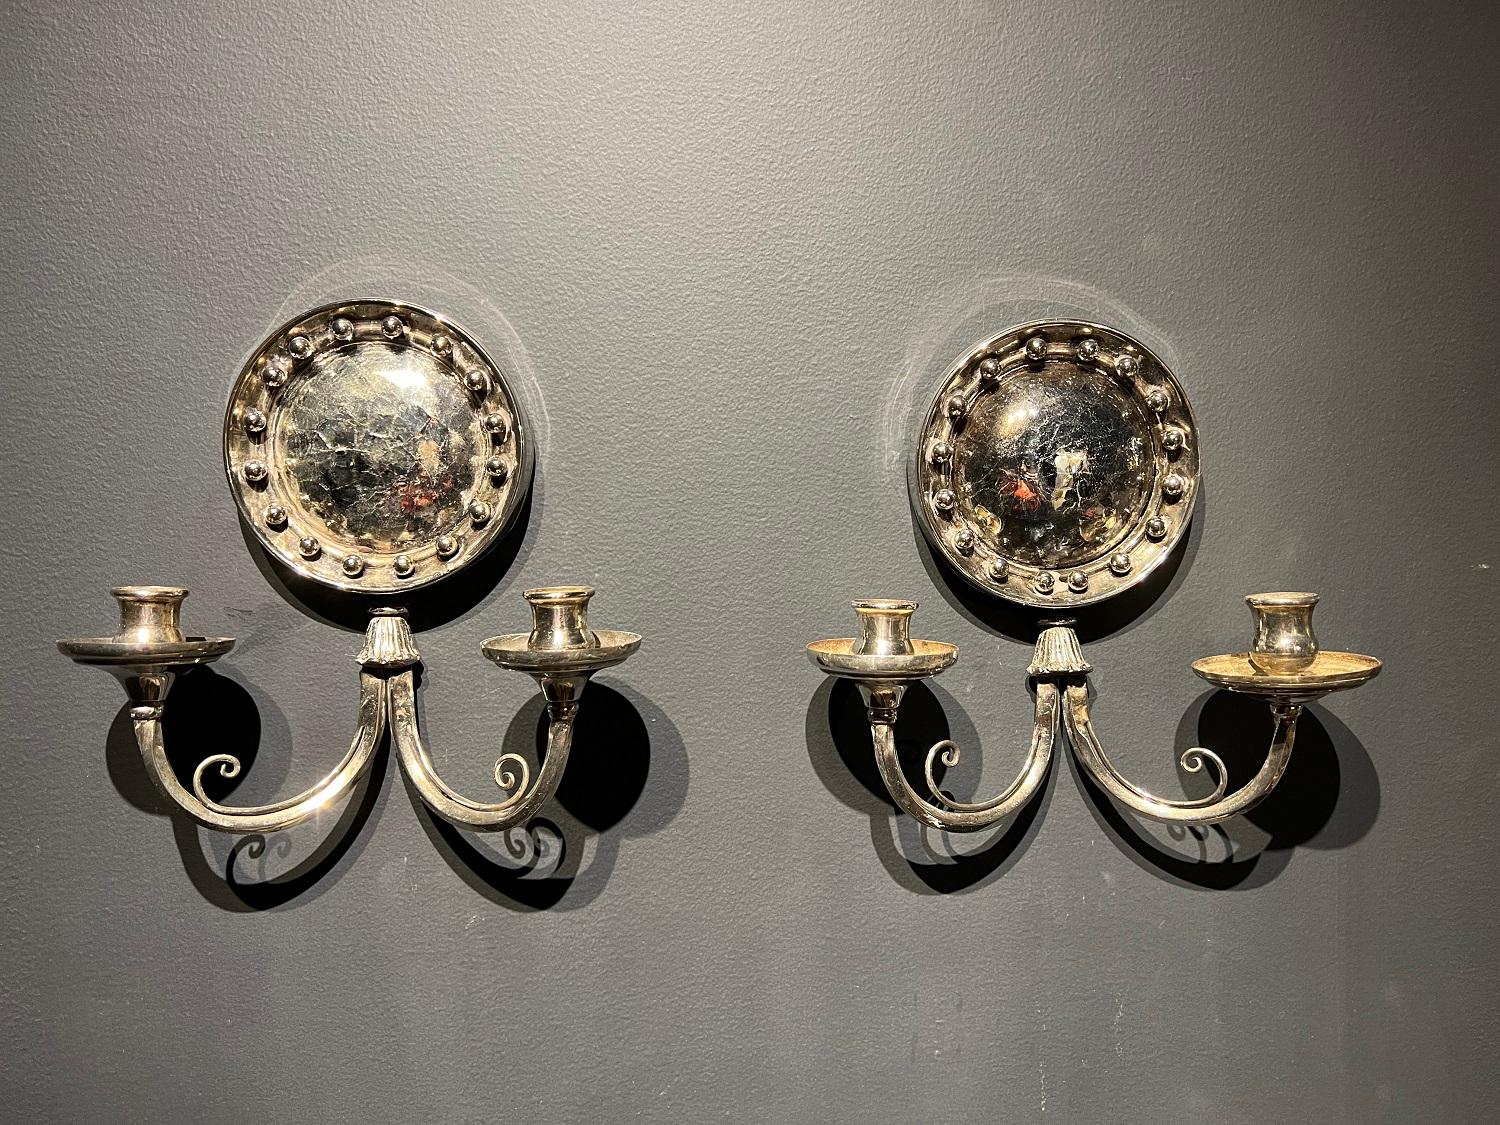 A pair of circa 1920’s Silver plated sconces with cracked mirrored backplate.